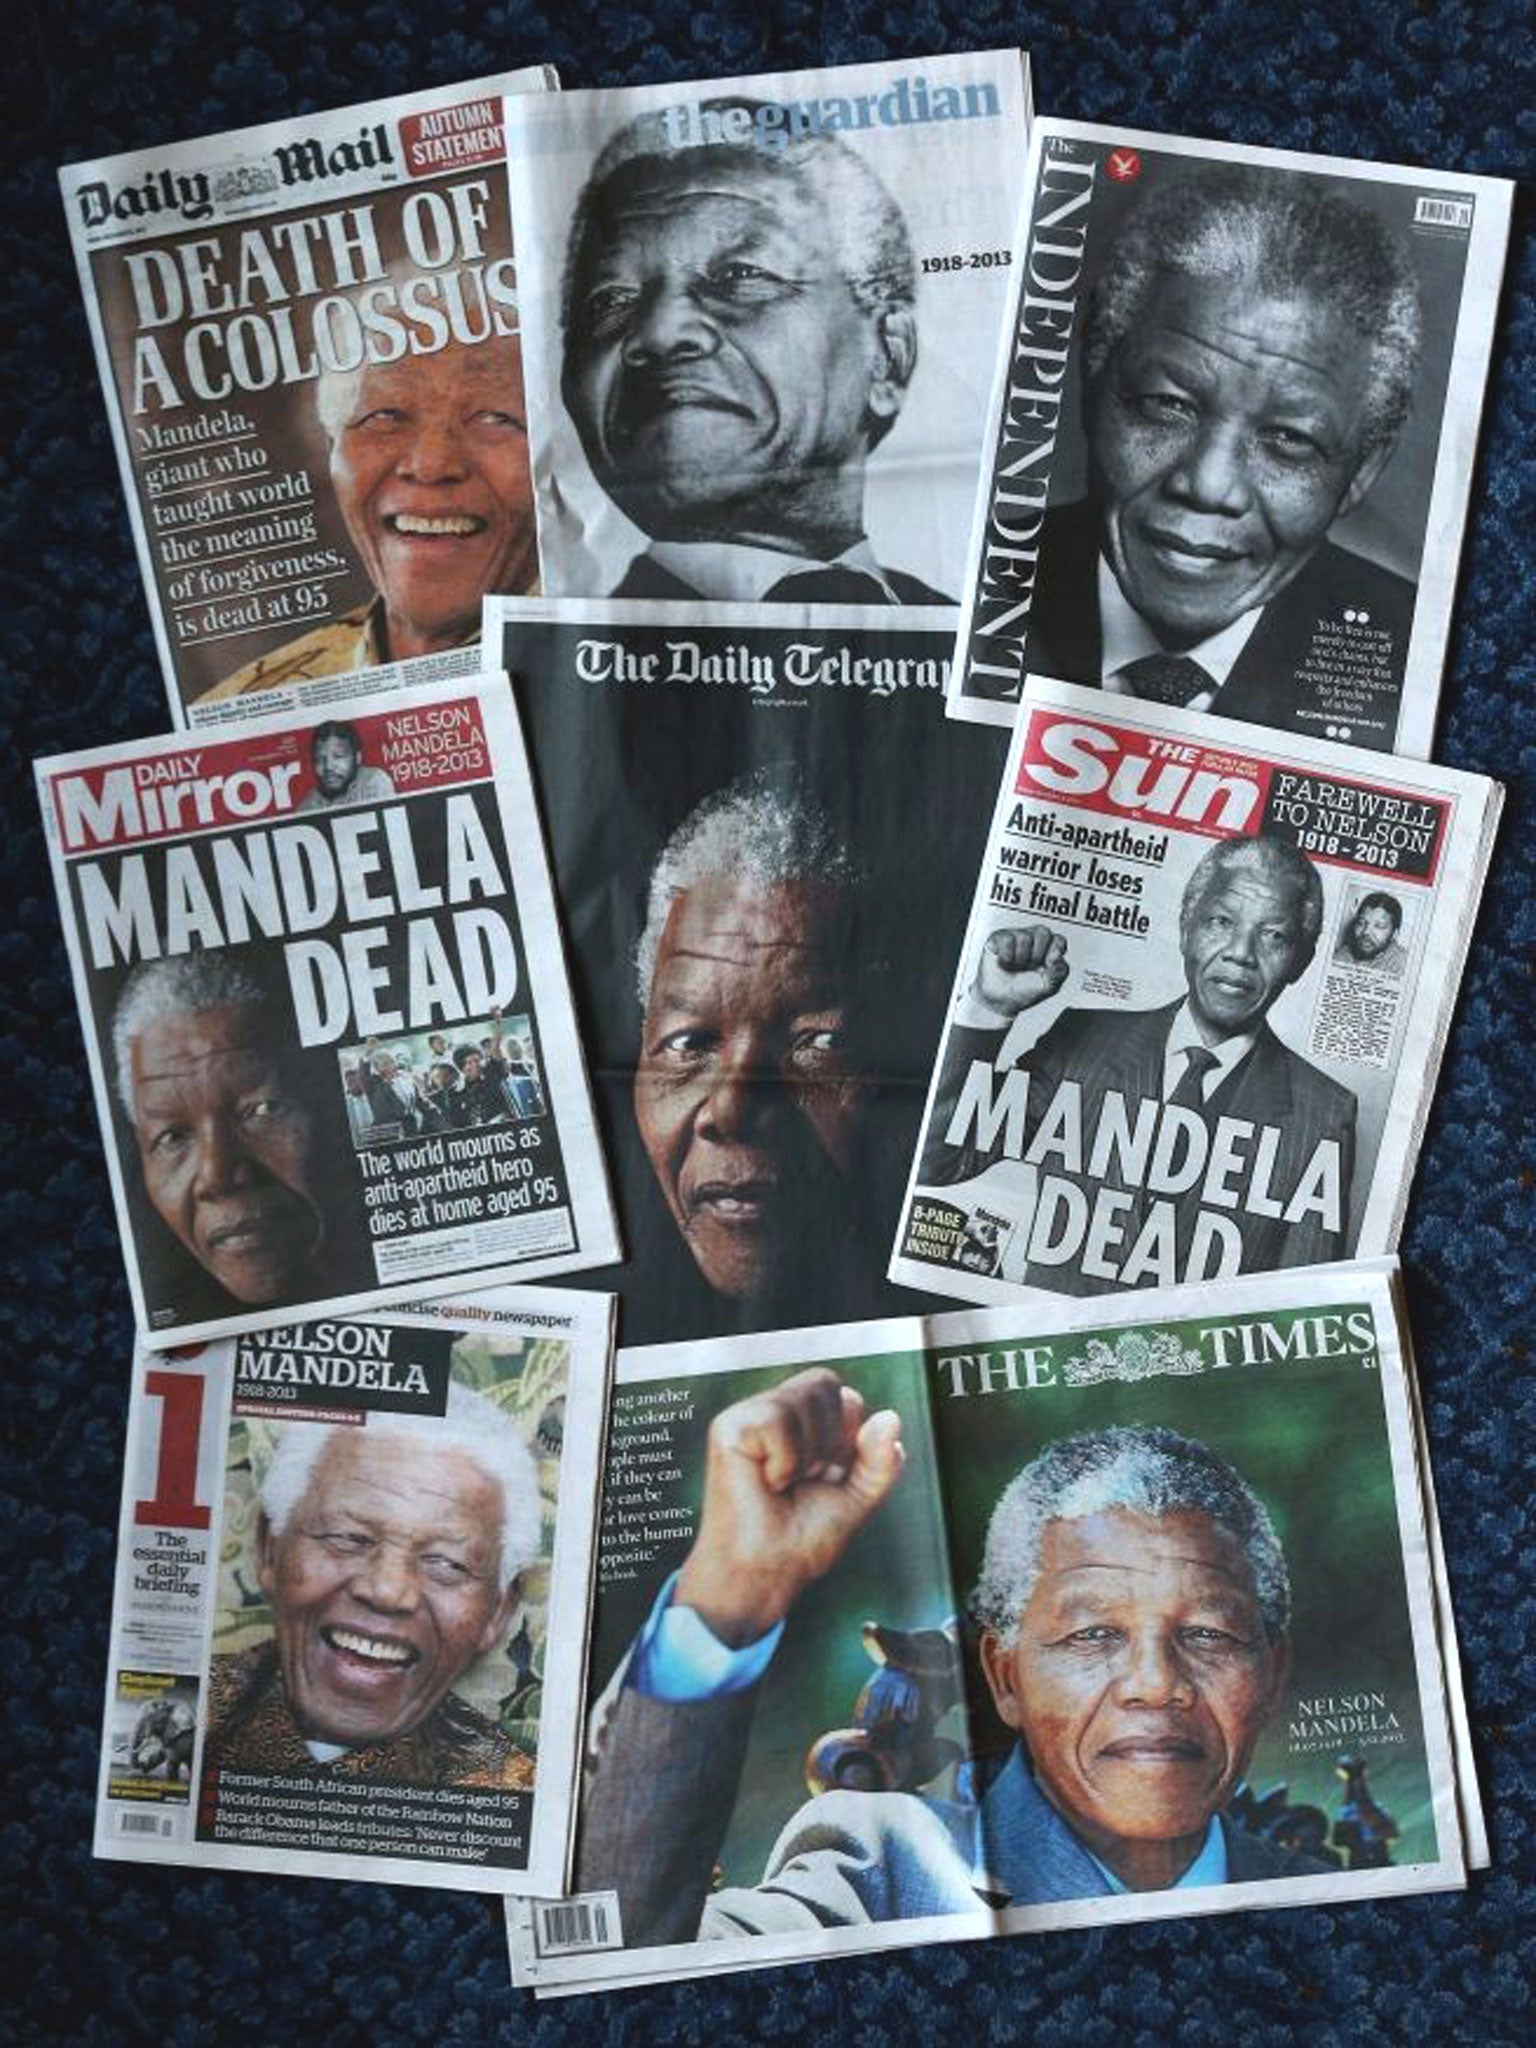 The front pages of British newspapers report on the death of former South African President Nelson Mandela in London, England